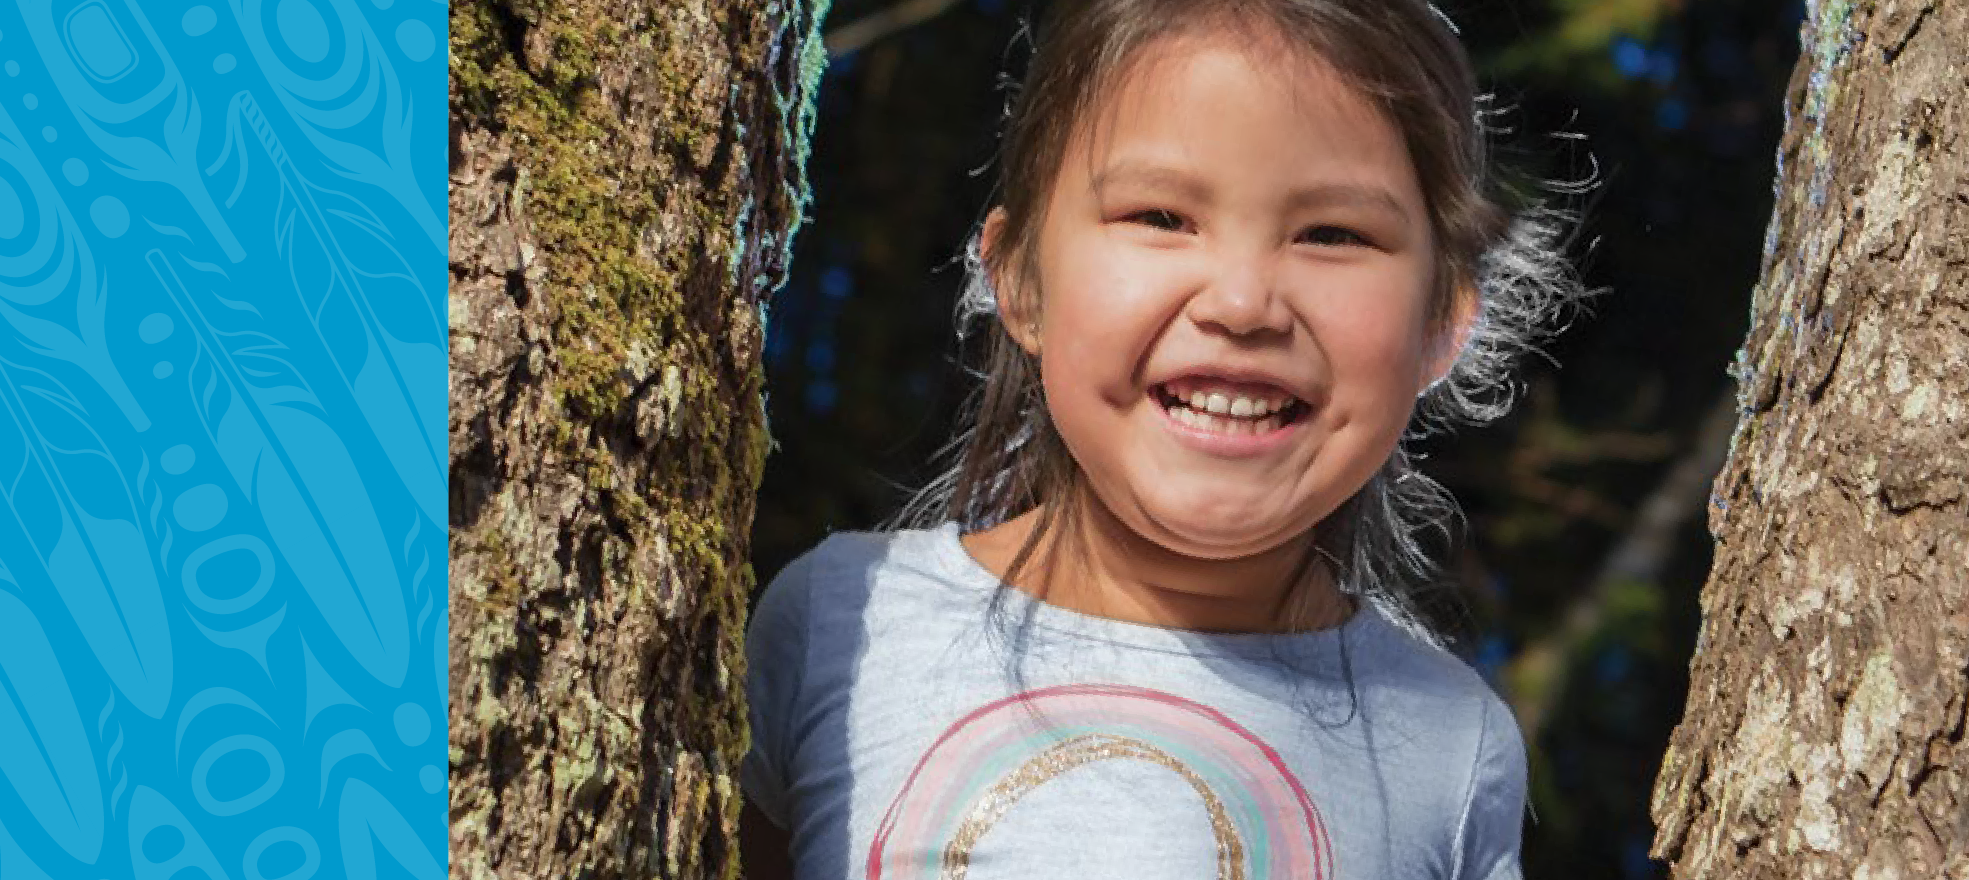 Smiling Indigenous child standing between two trees